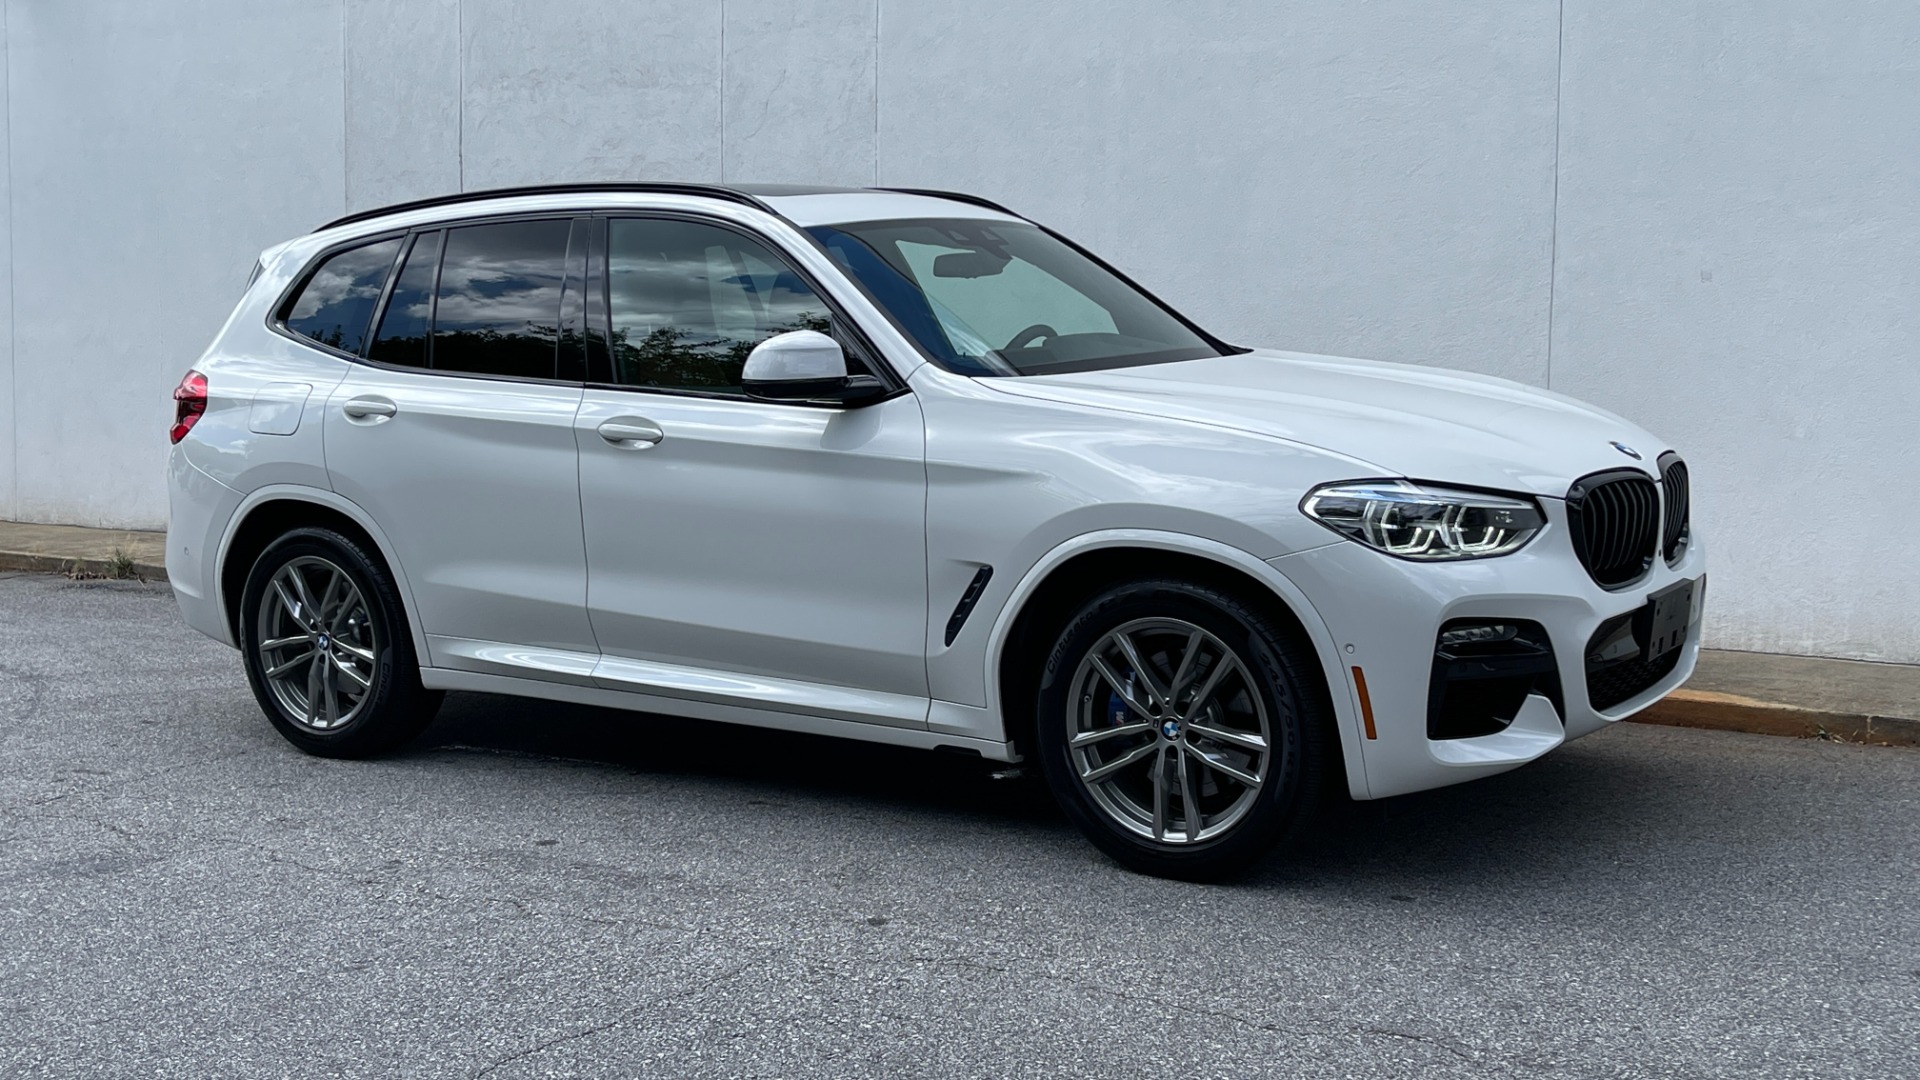 Used 2021 BMW X3 M40i / EXECUTIVE PACKAGE / SHADOWLINE TRIM / HEADS UP DISPLAY / AMBIENT LIG for sale $58,995 at Formula Imports in Charlotte NC 28227 2